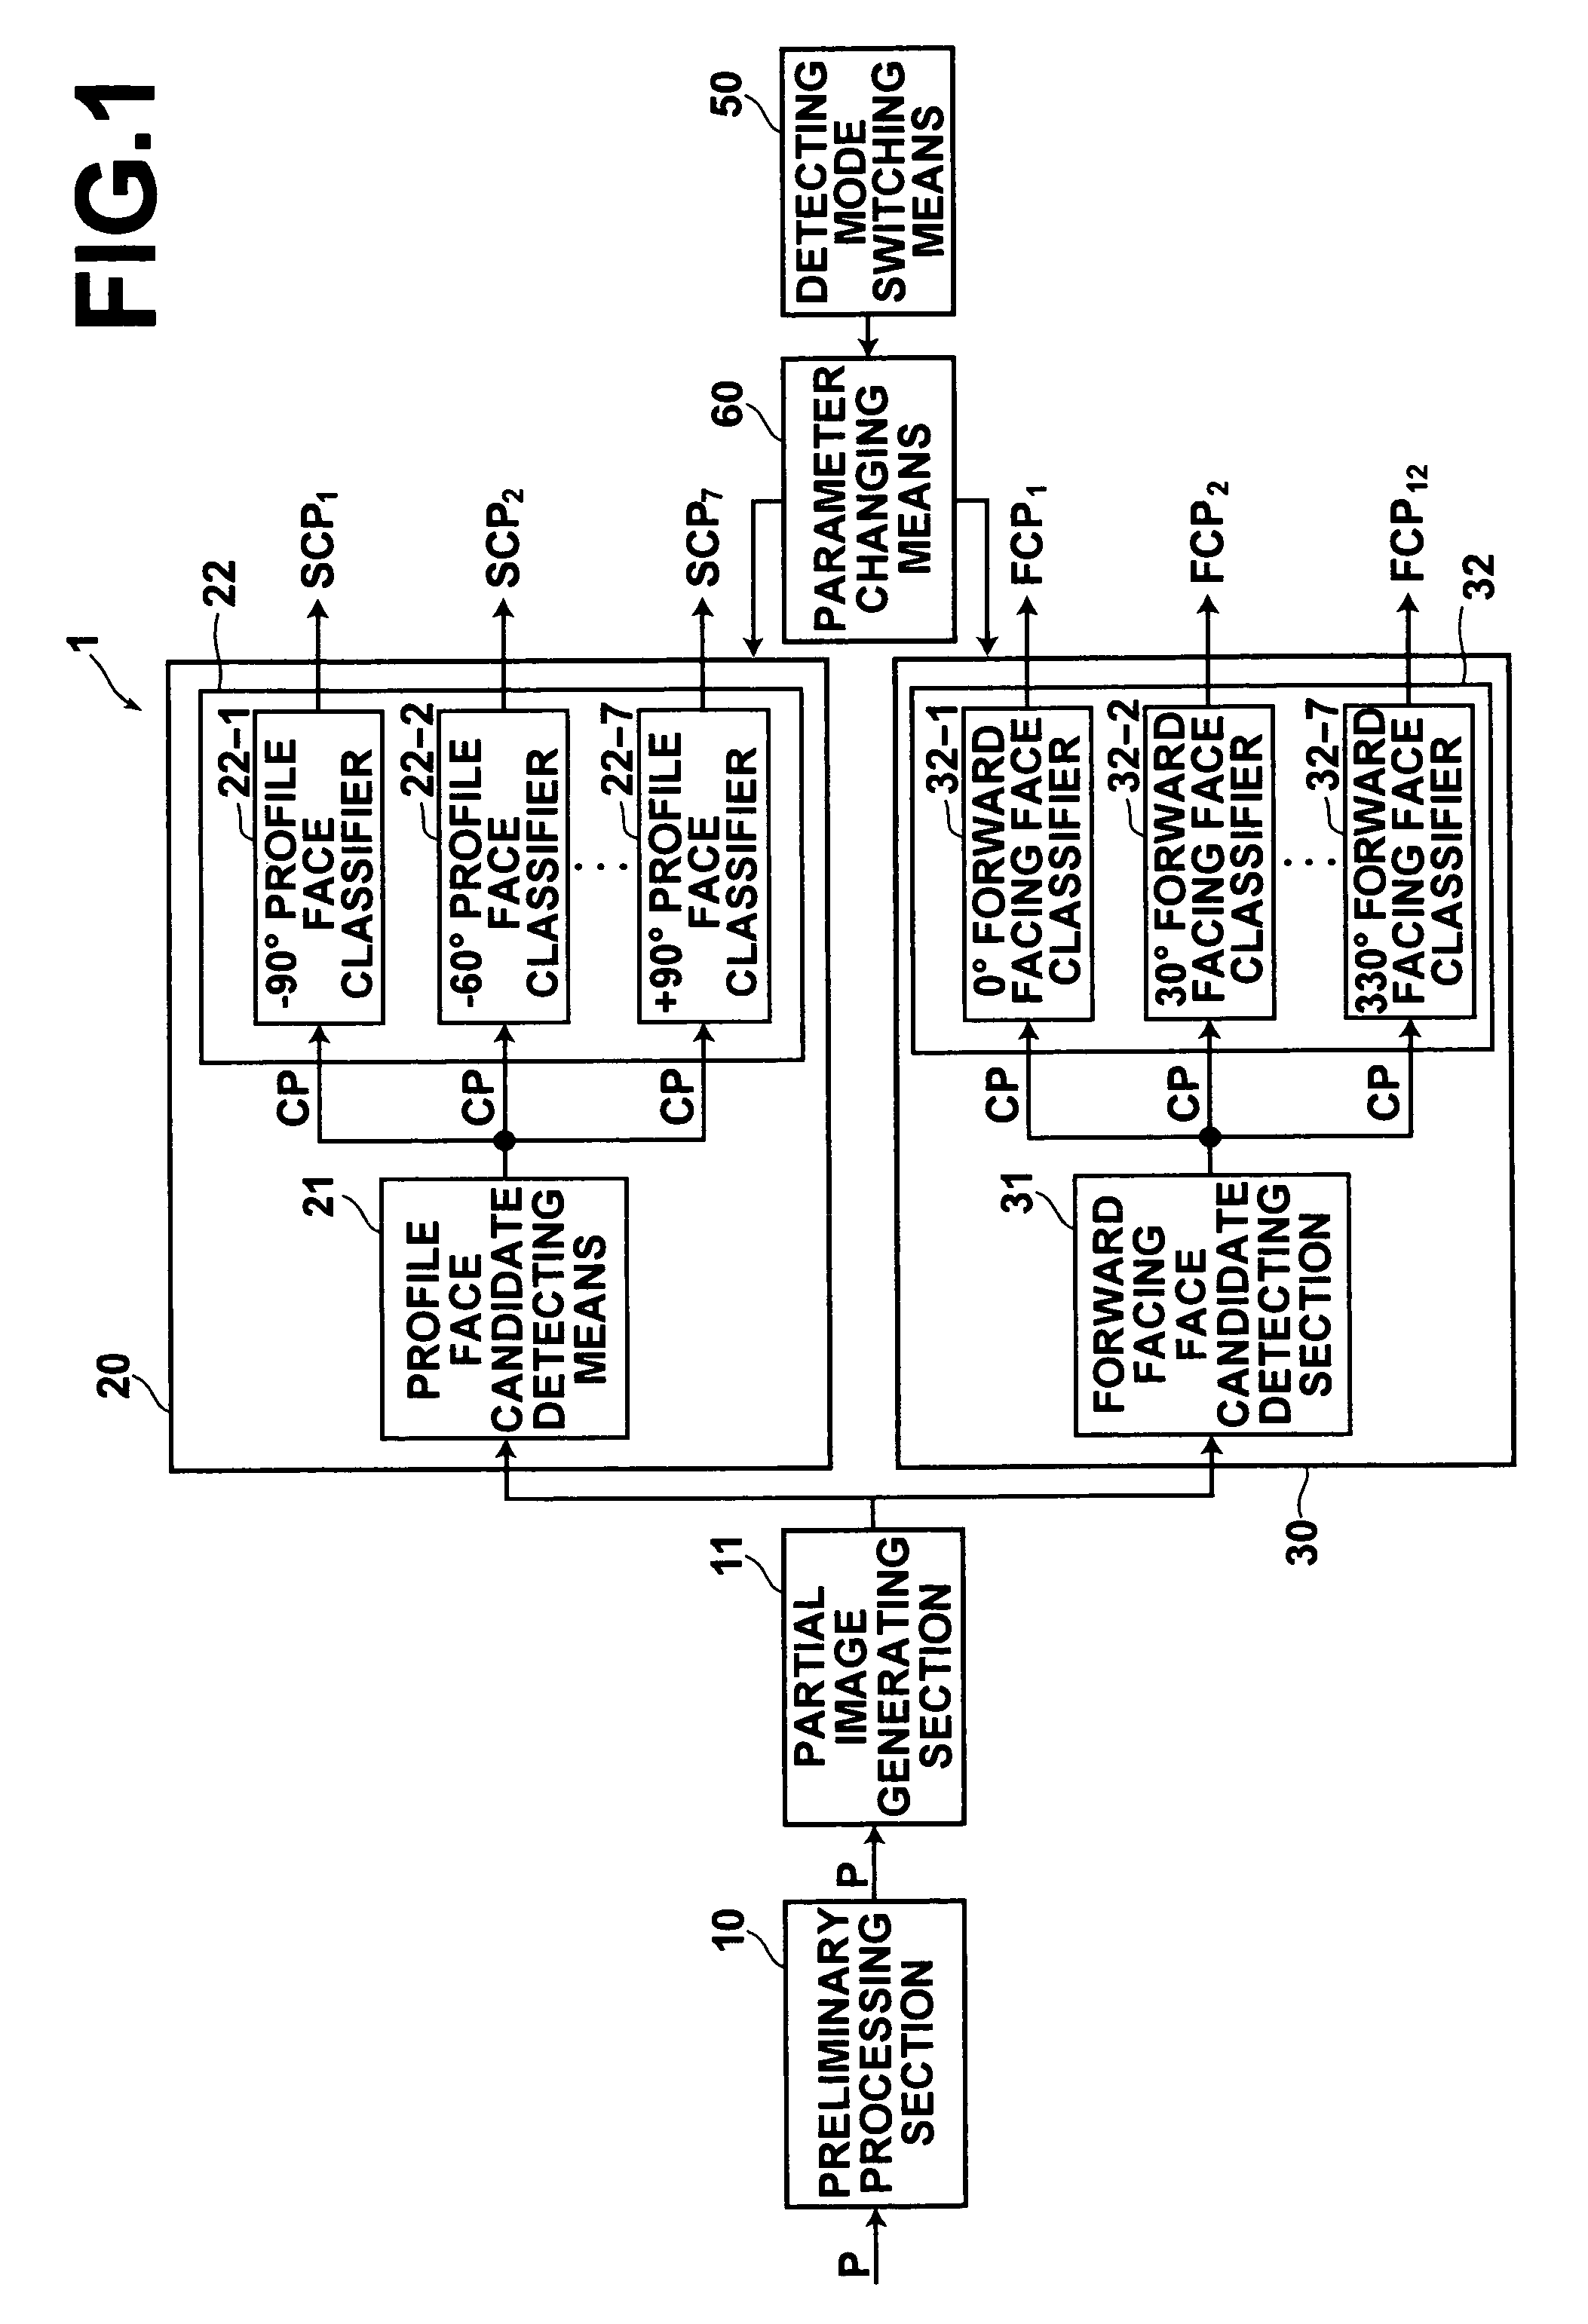 Apparatus and program for detecting faces